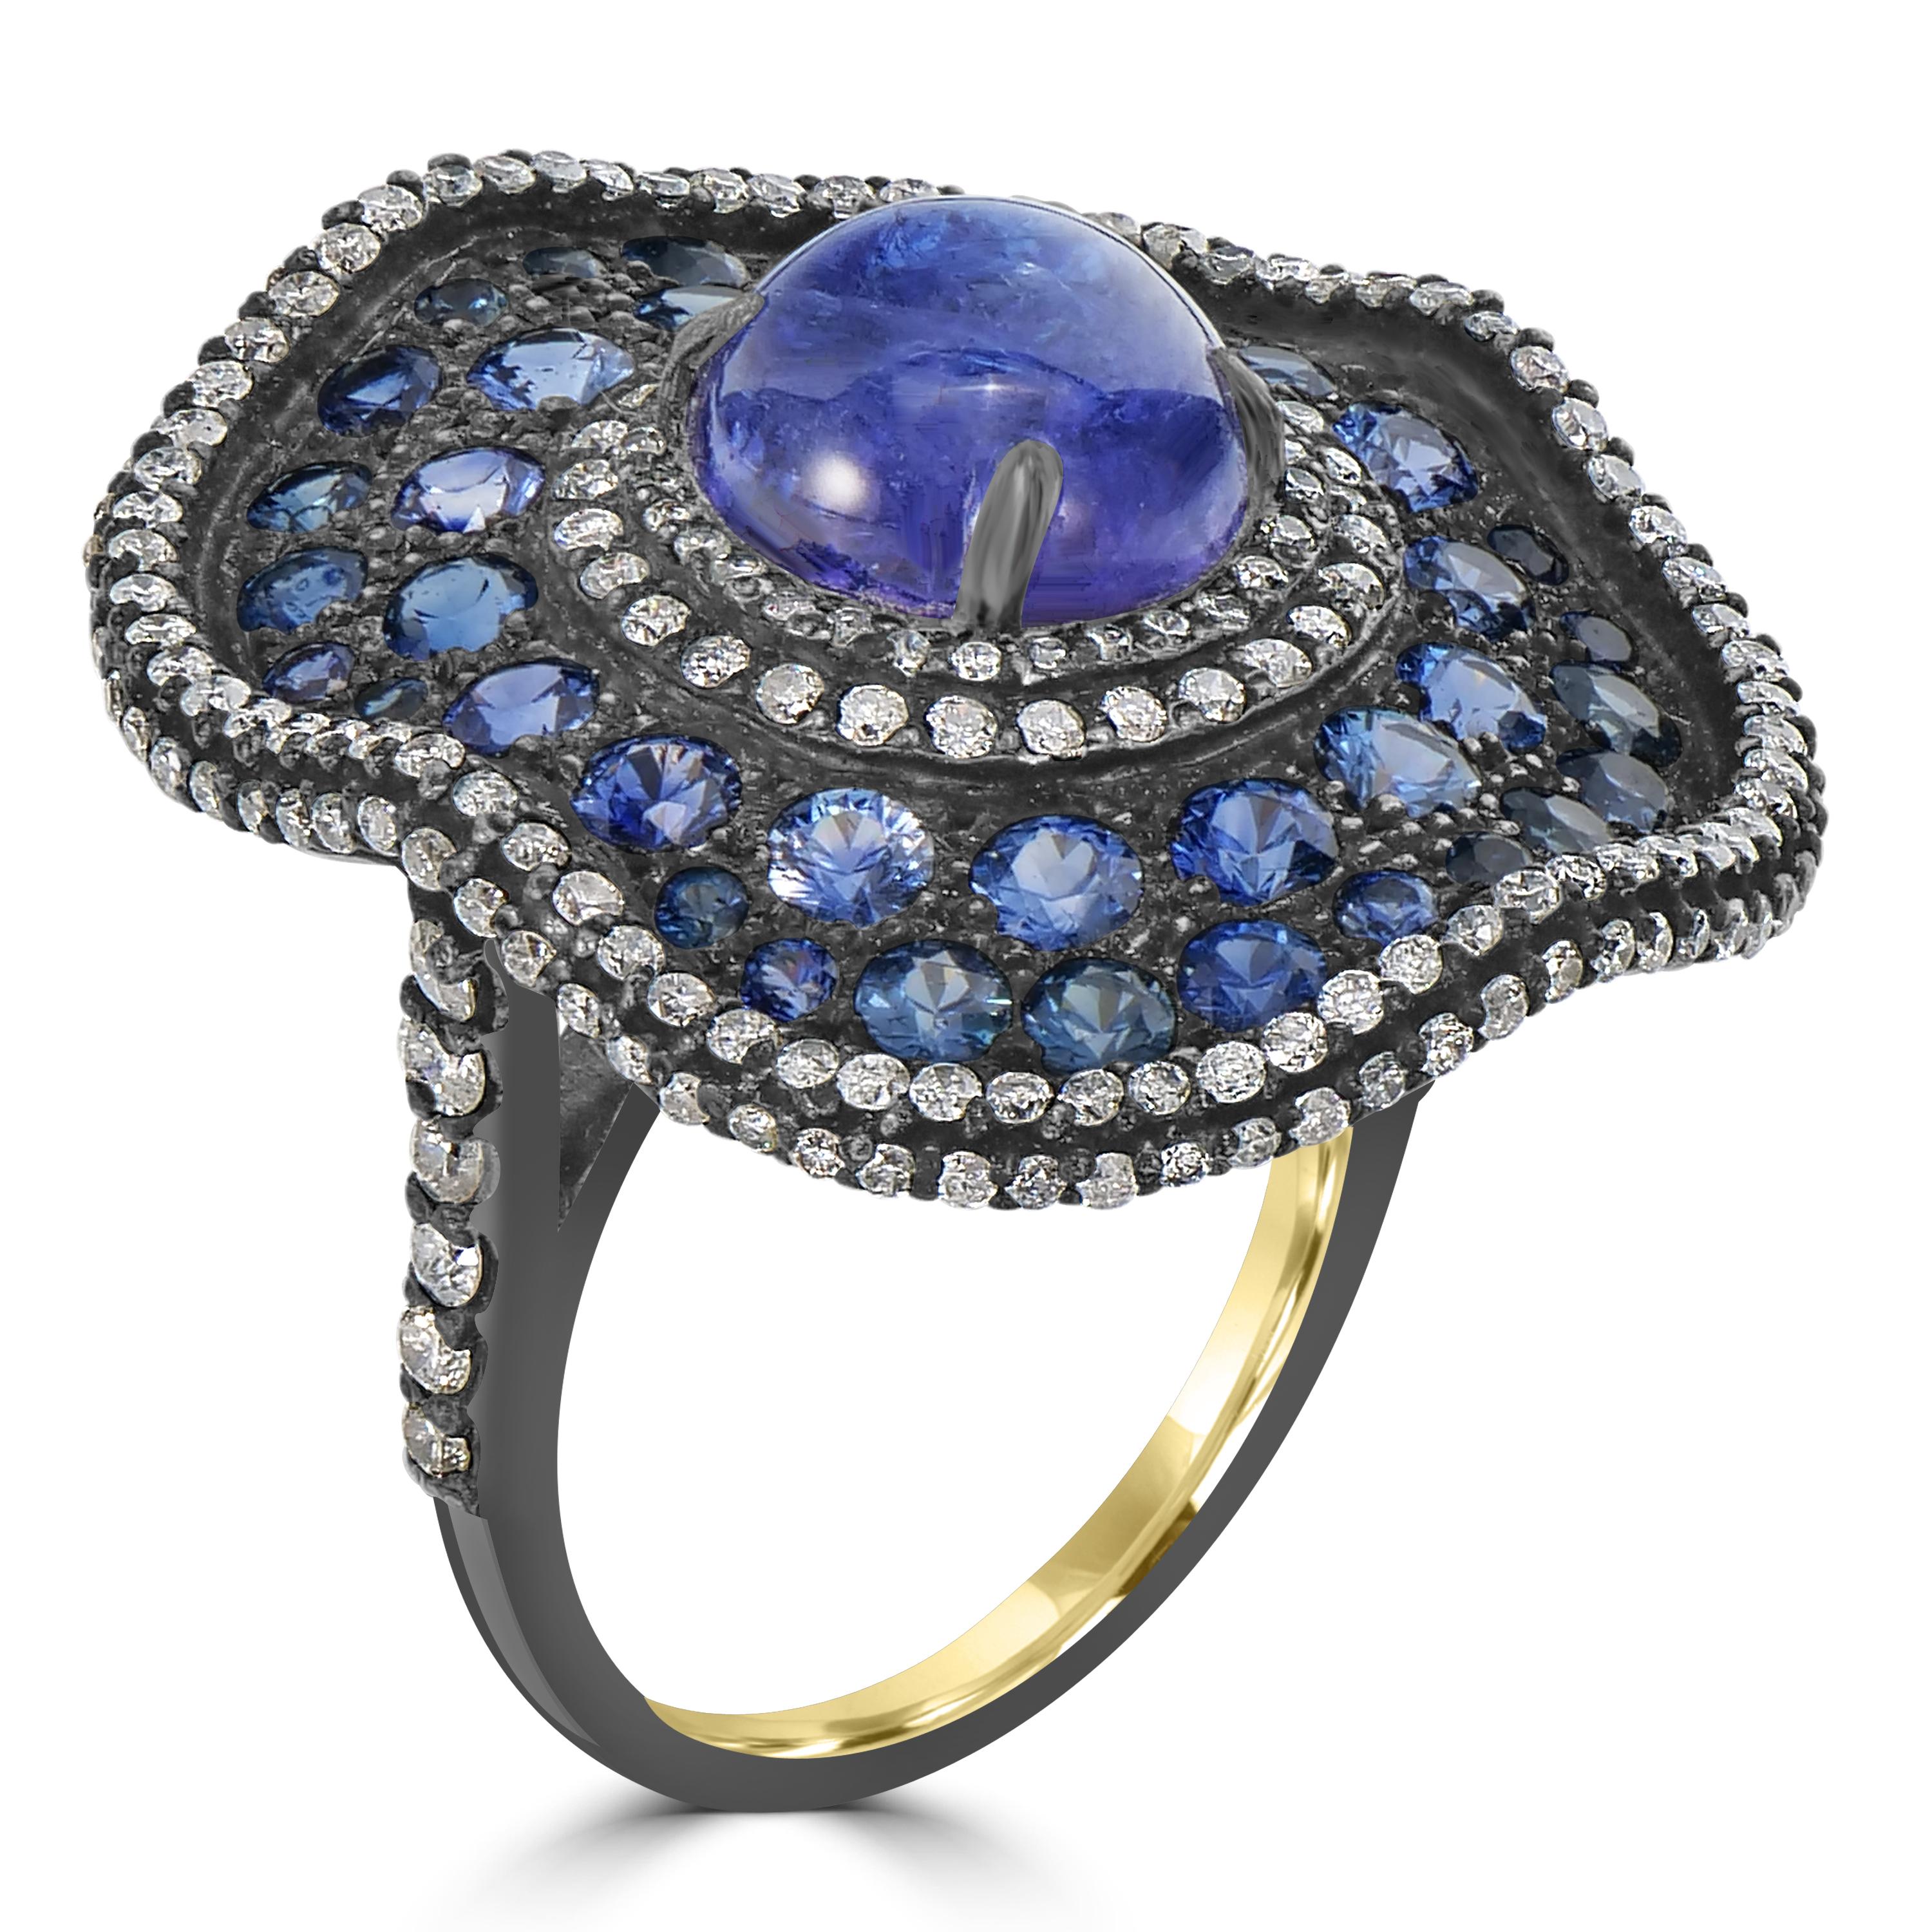 Women's Victorian 7.6 cttw. Tanzanite, Blue Sapphire and Diamond Ring in 18K/925 Gold